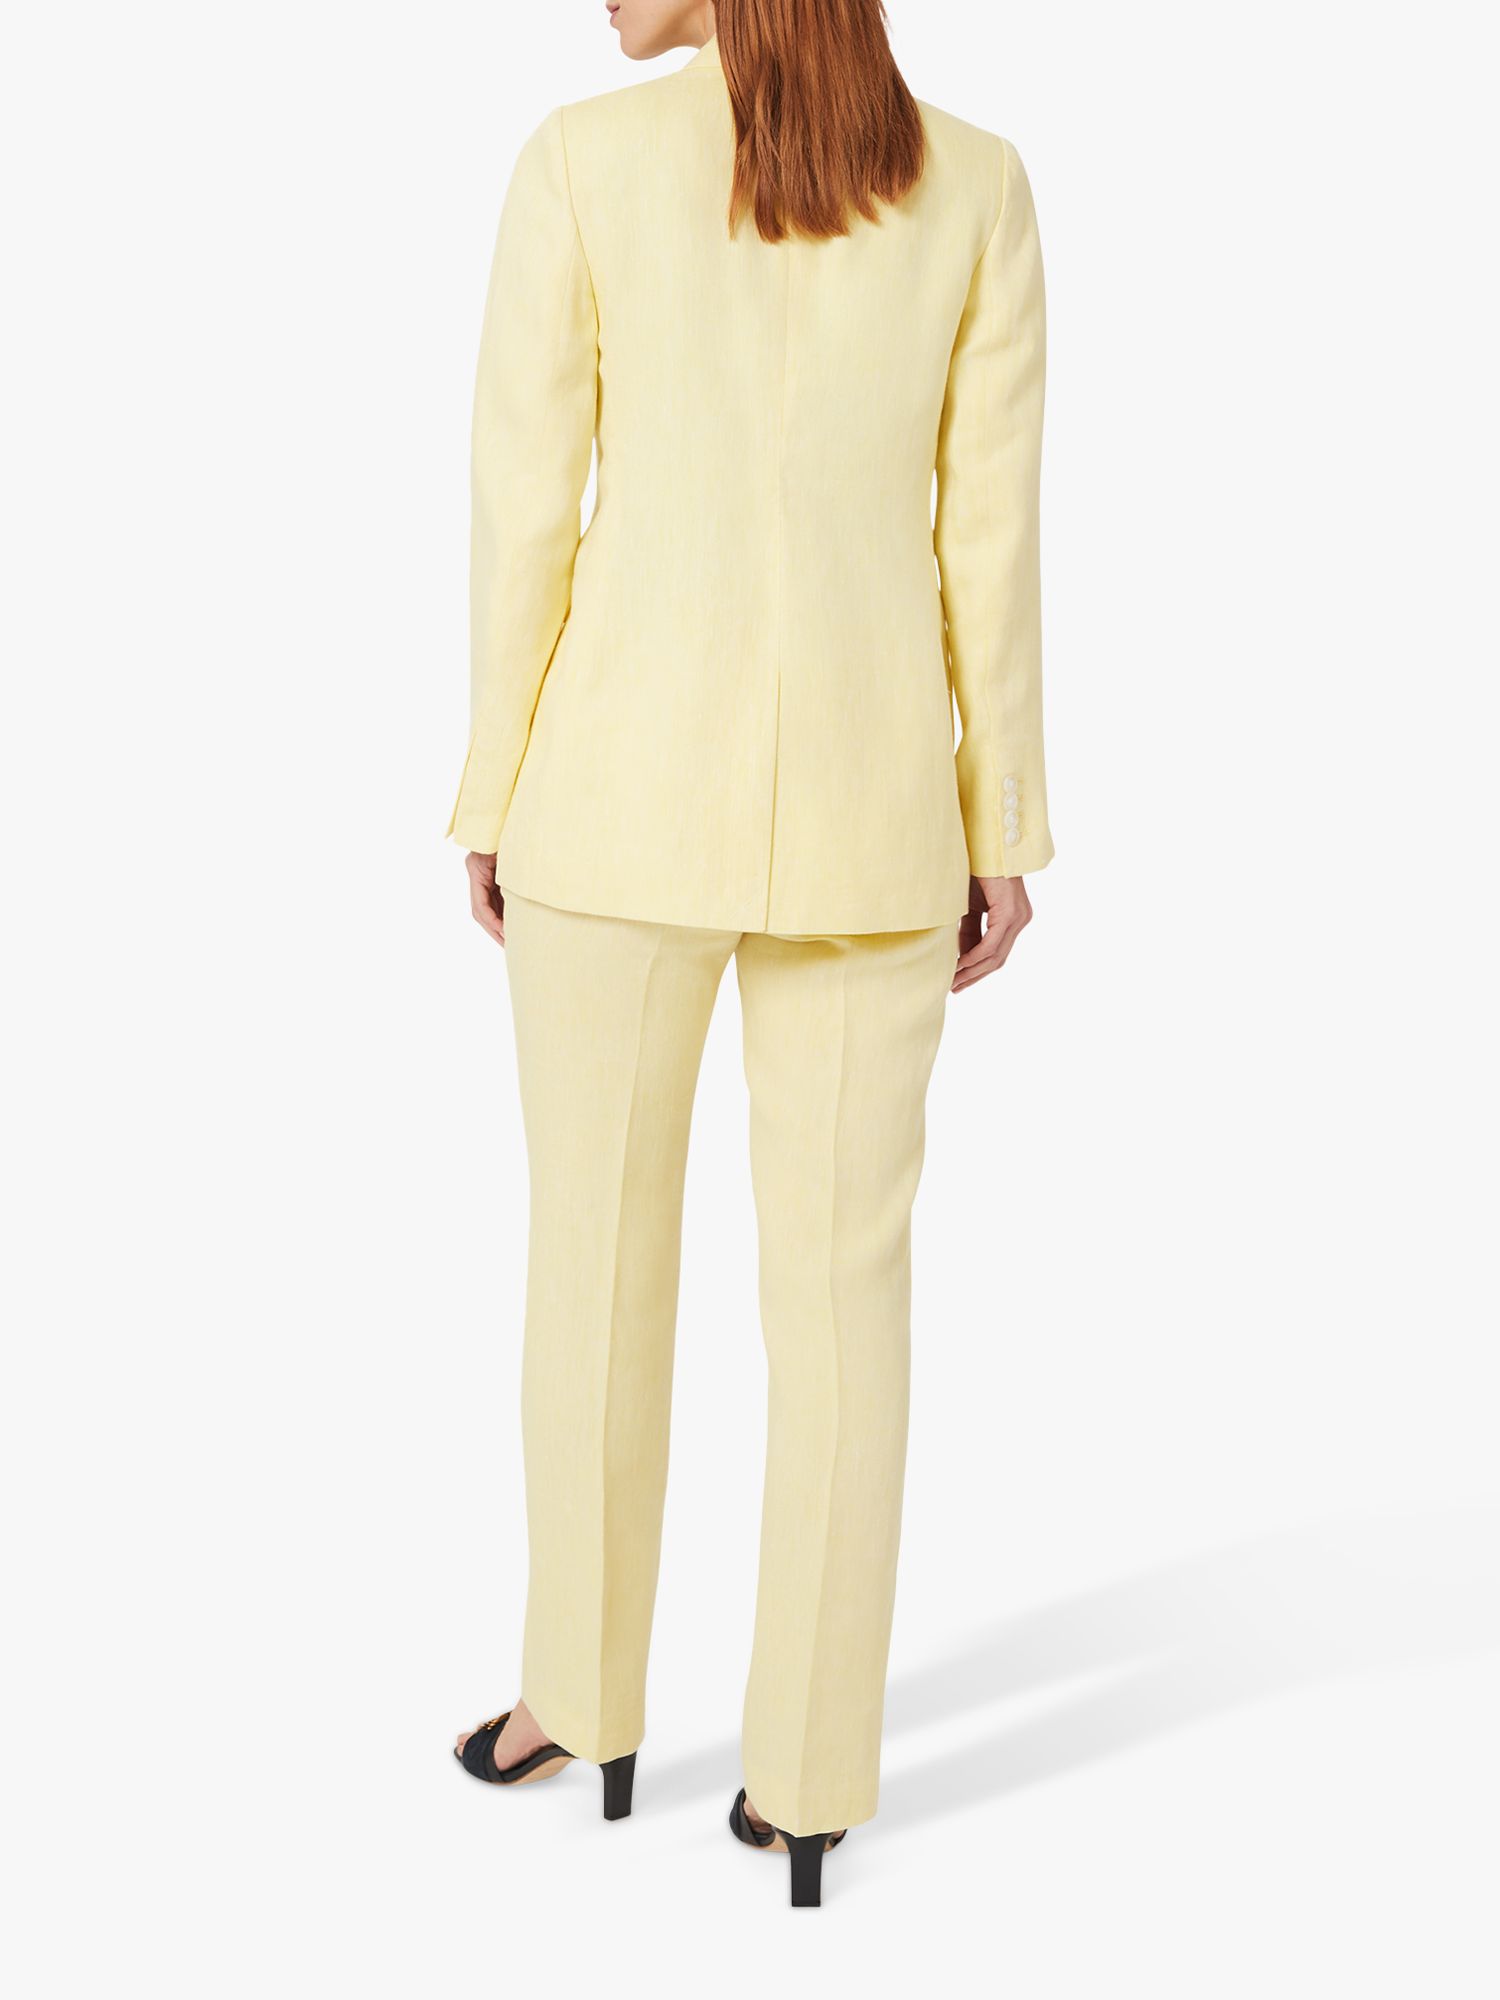 Hobbs Asher Linen Suit Trousers, Yellow